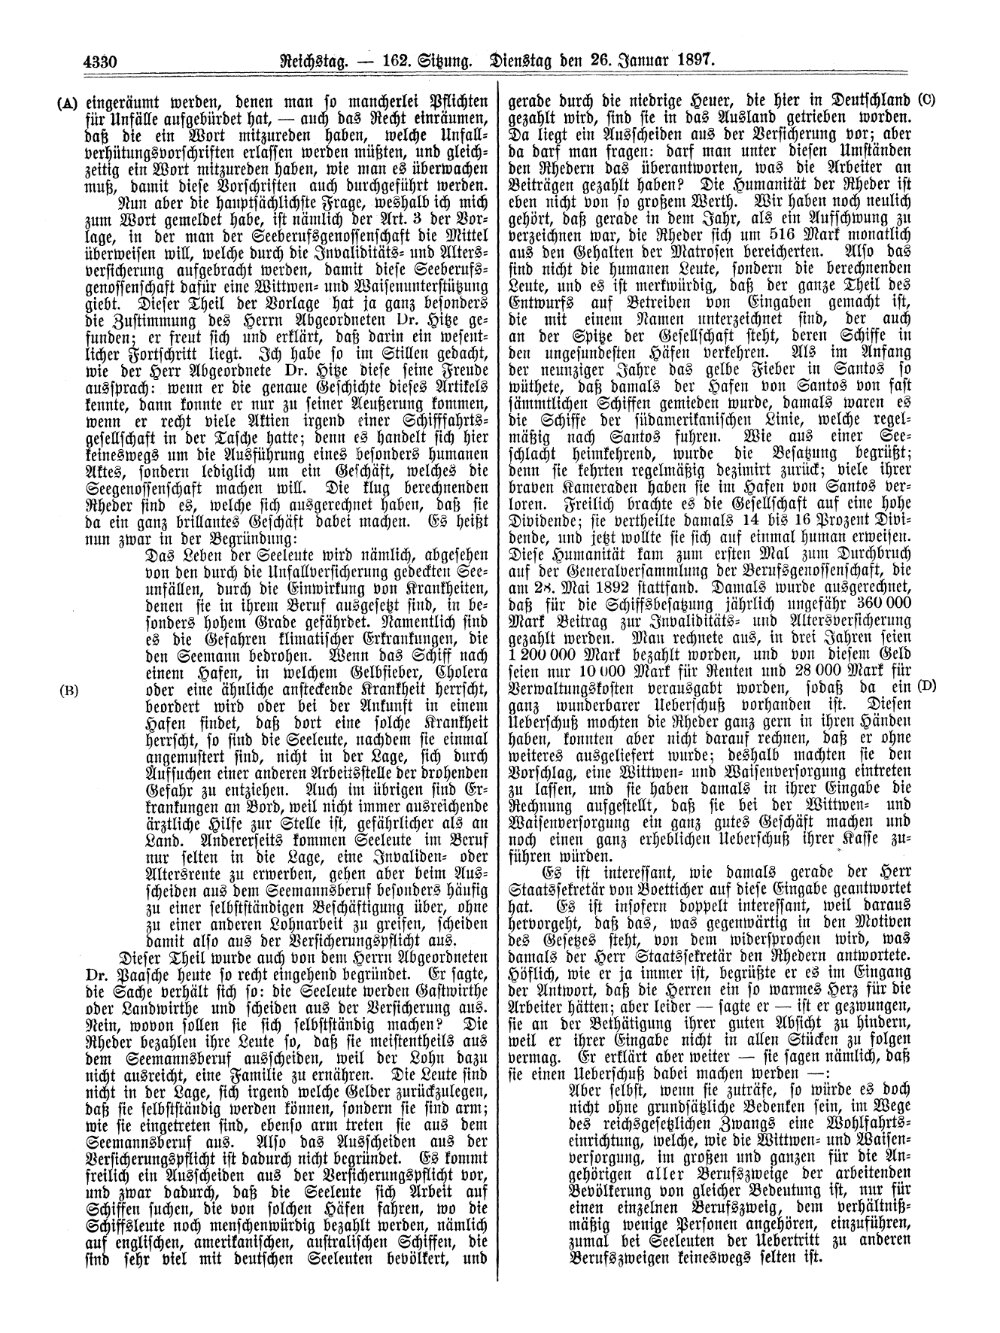 Scan of page 4330